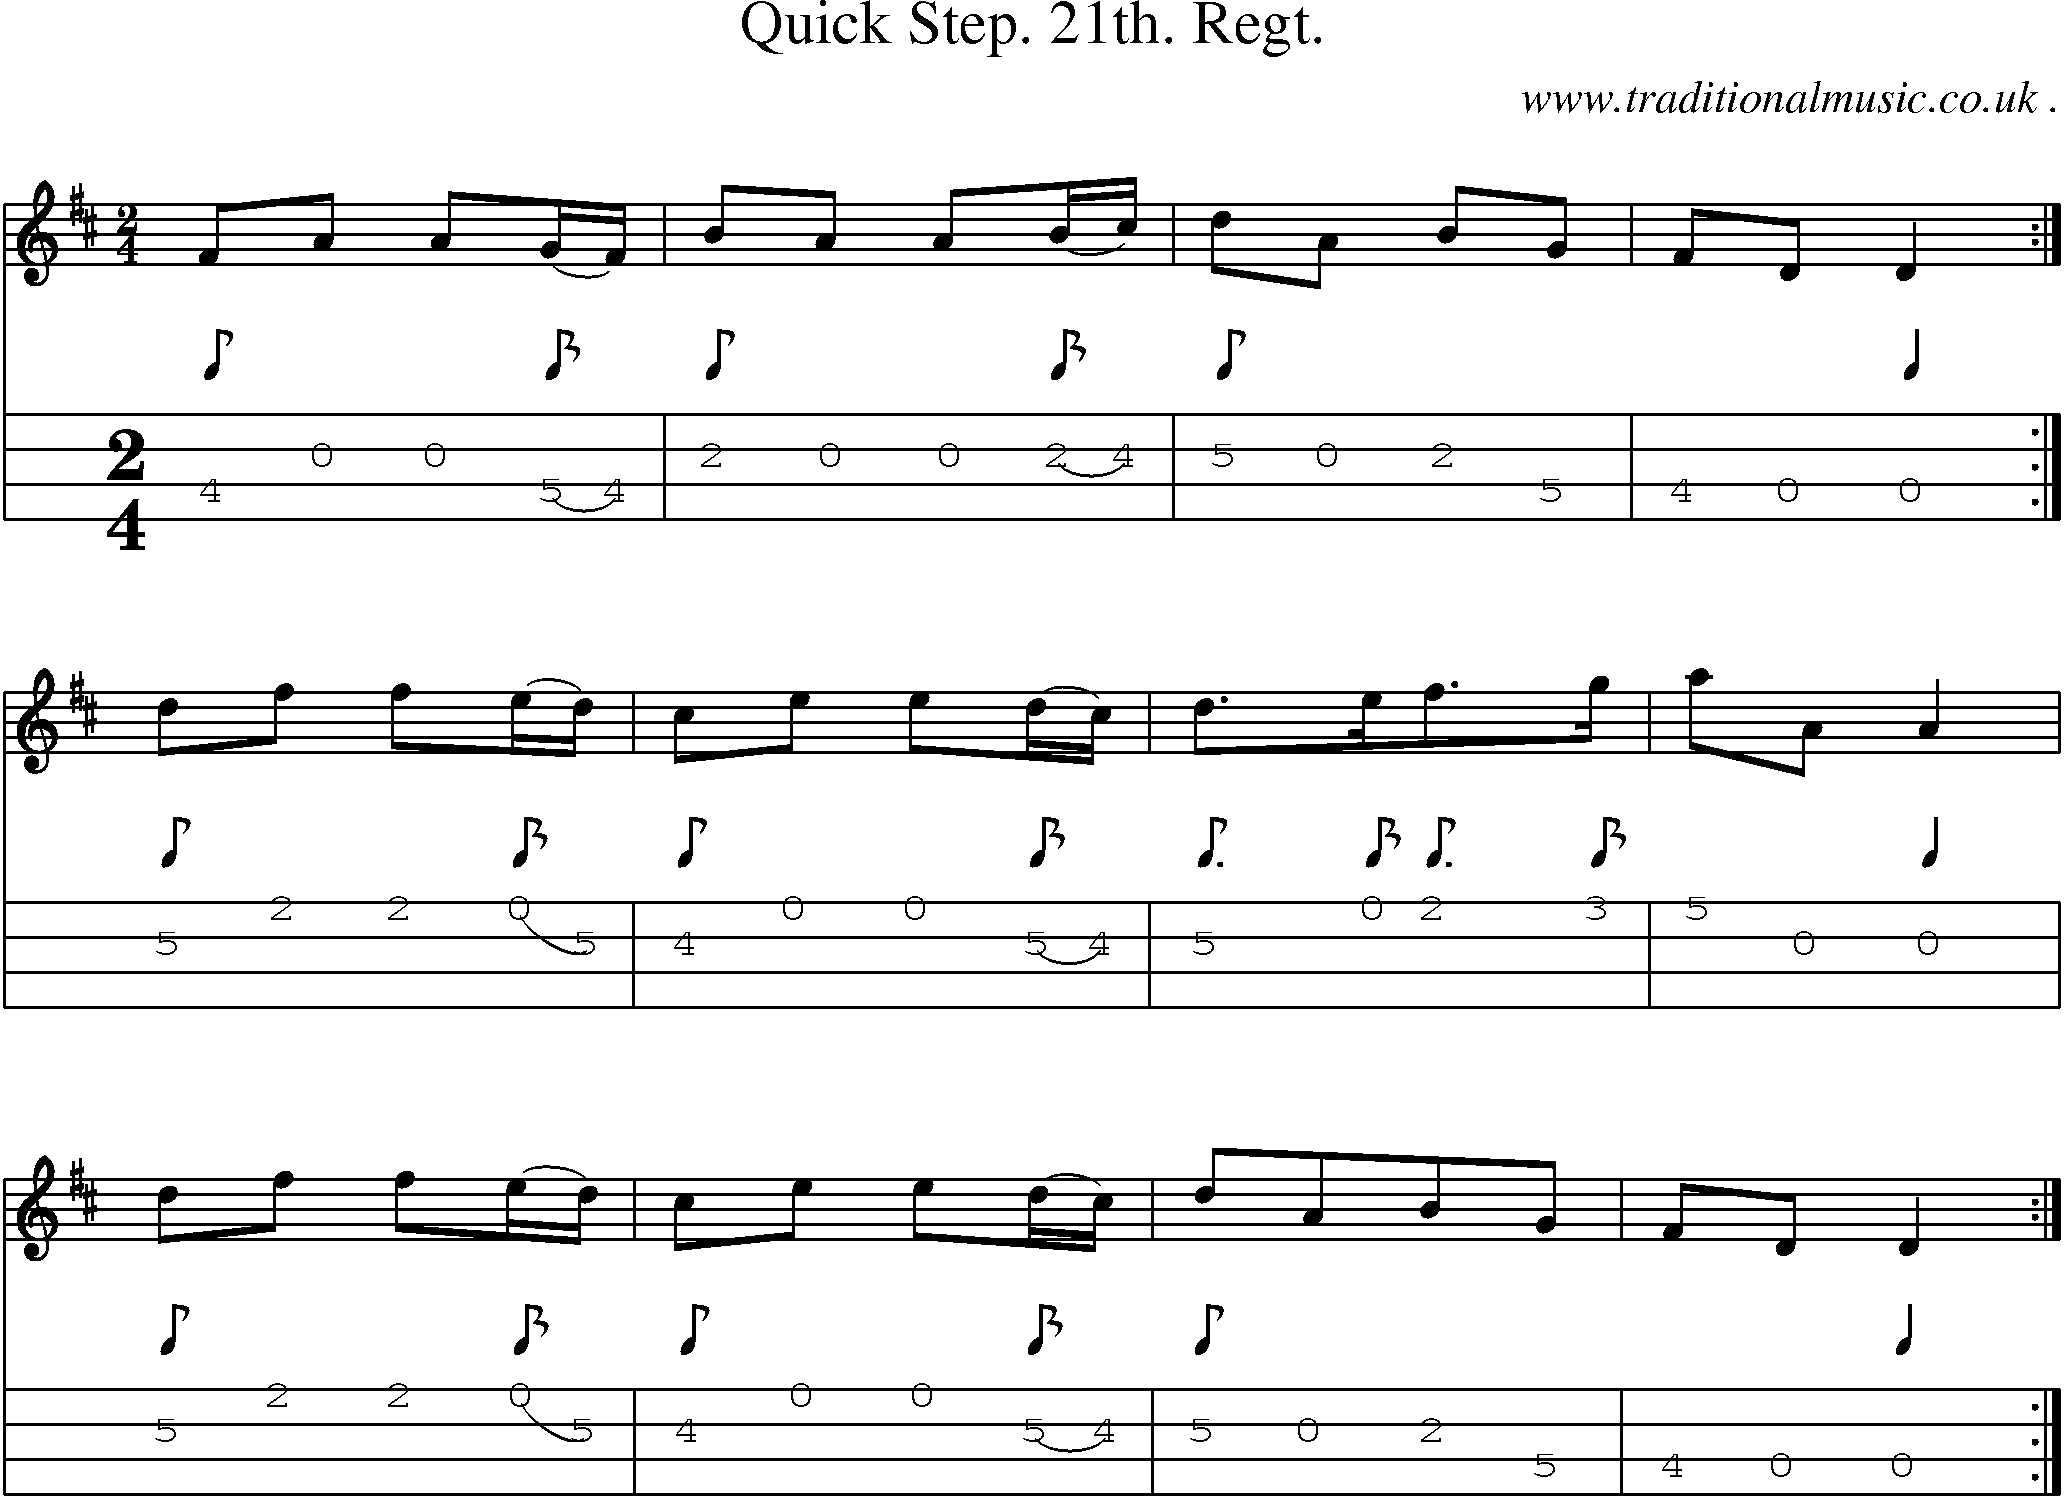 Sheet-music  score, Chords and Mandolin Tabs for Quick Step 21th Regt